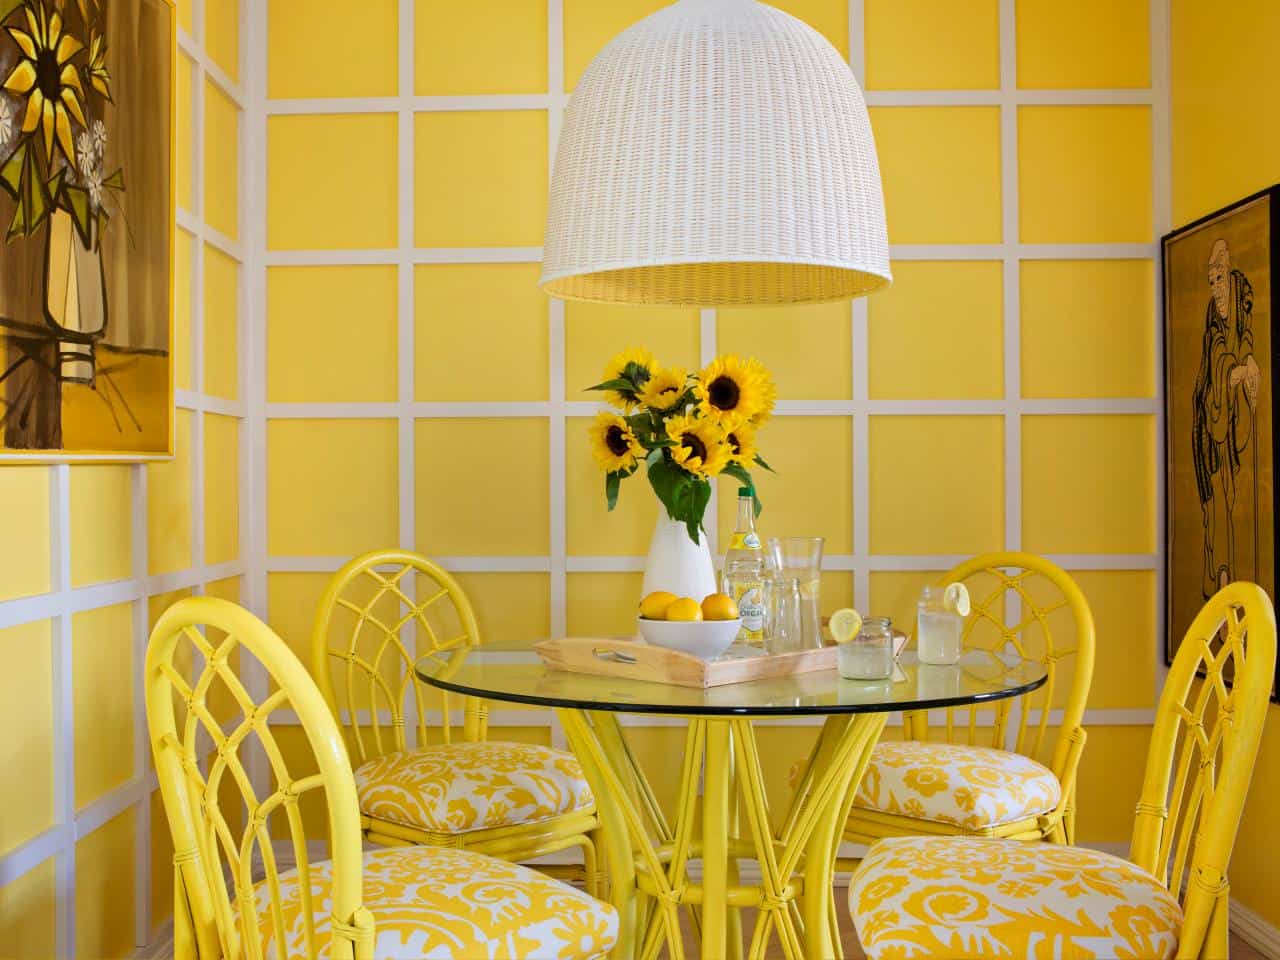 We love the idea of using yellow as the main hue for your breakfast nook.